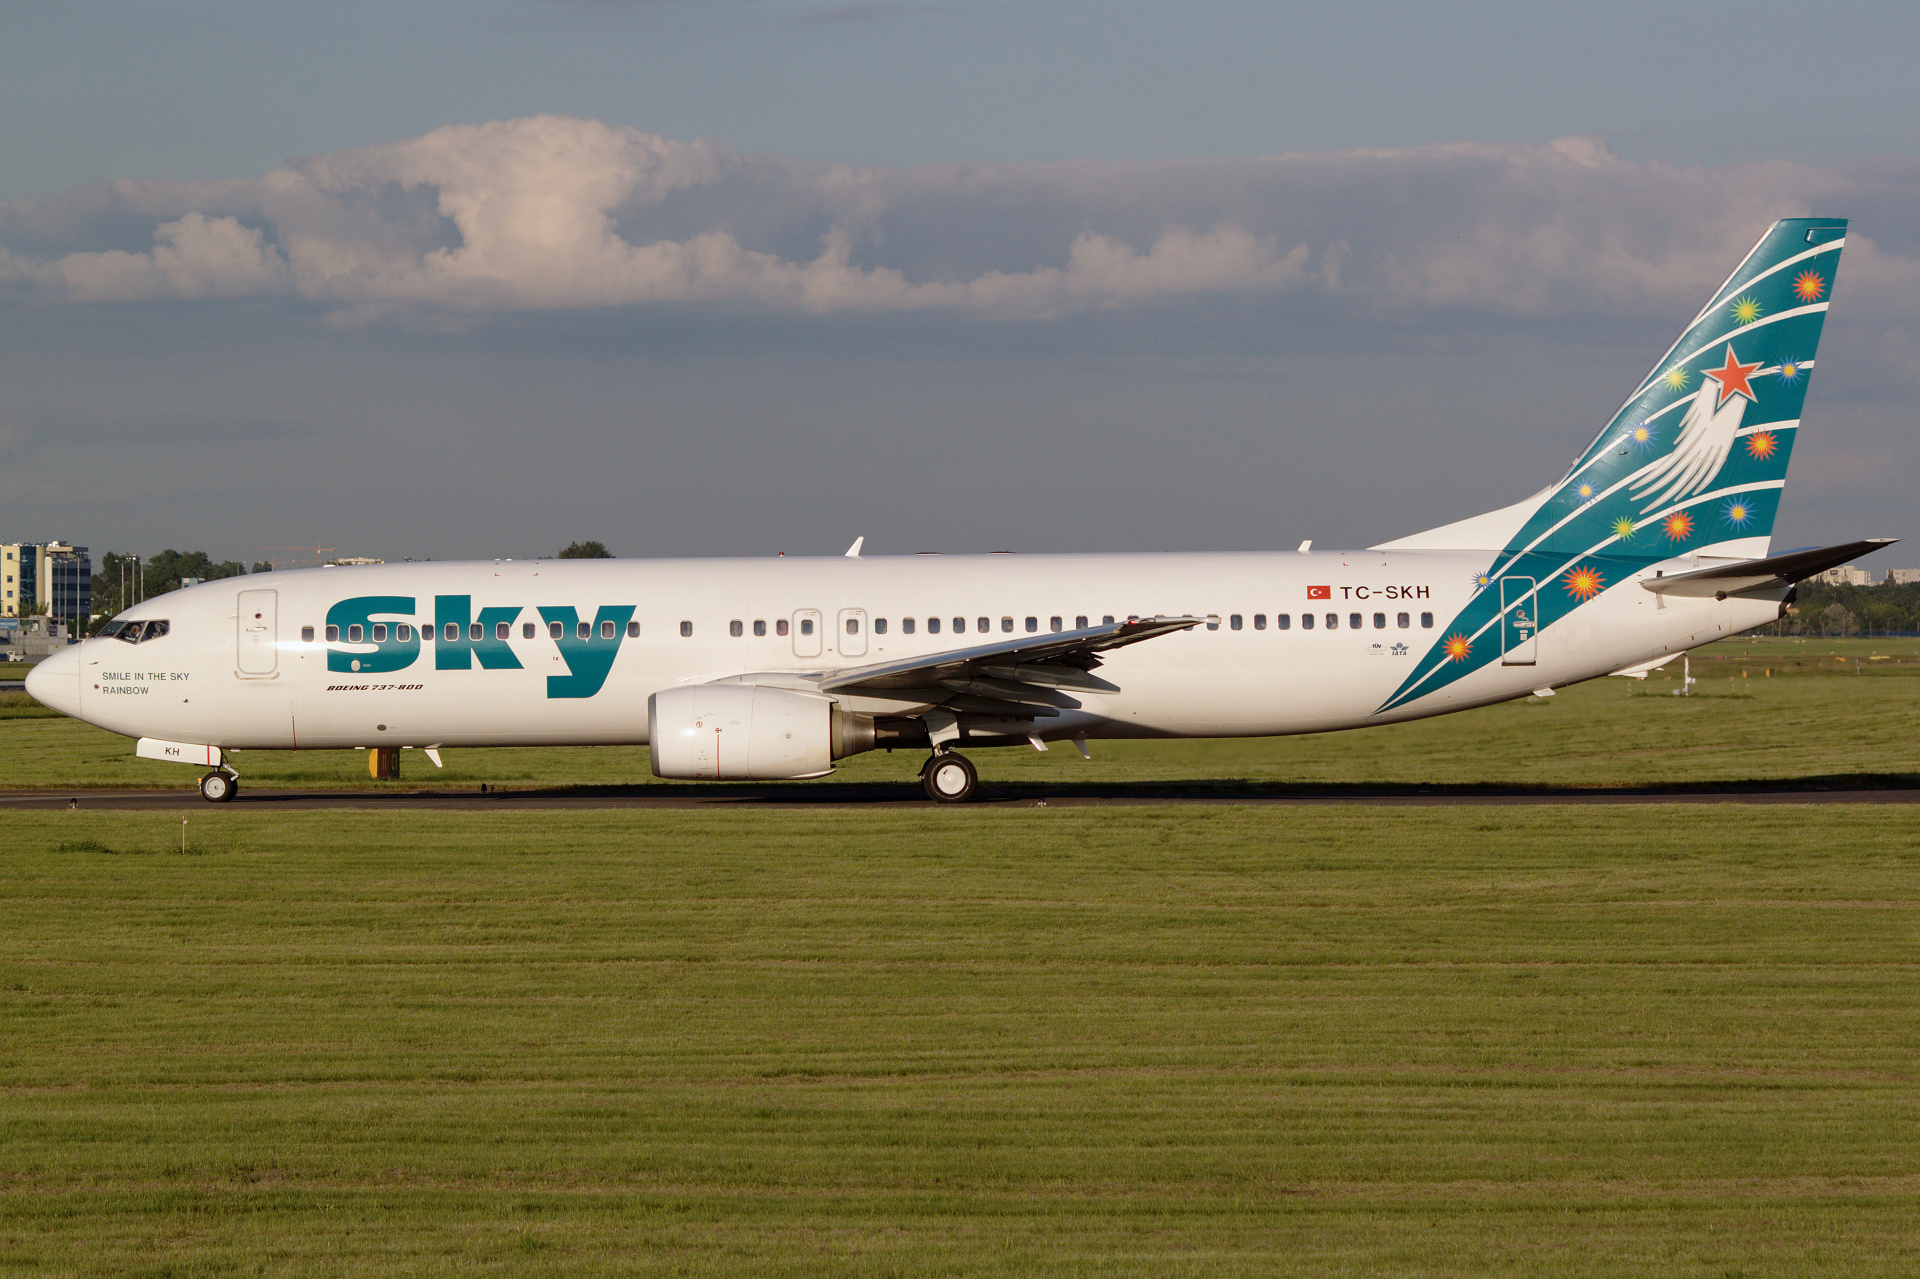 TC-SKH, Sky Airlines (Aircraft » EPWA Spotting » Boeing 737-800)